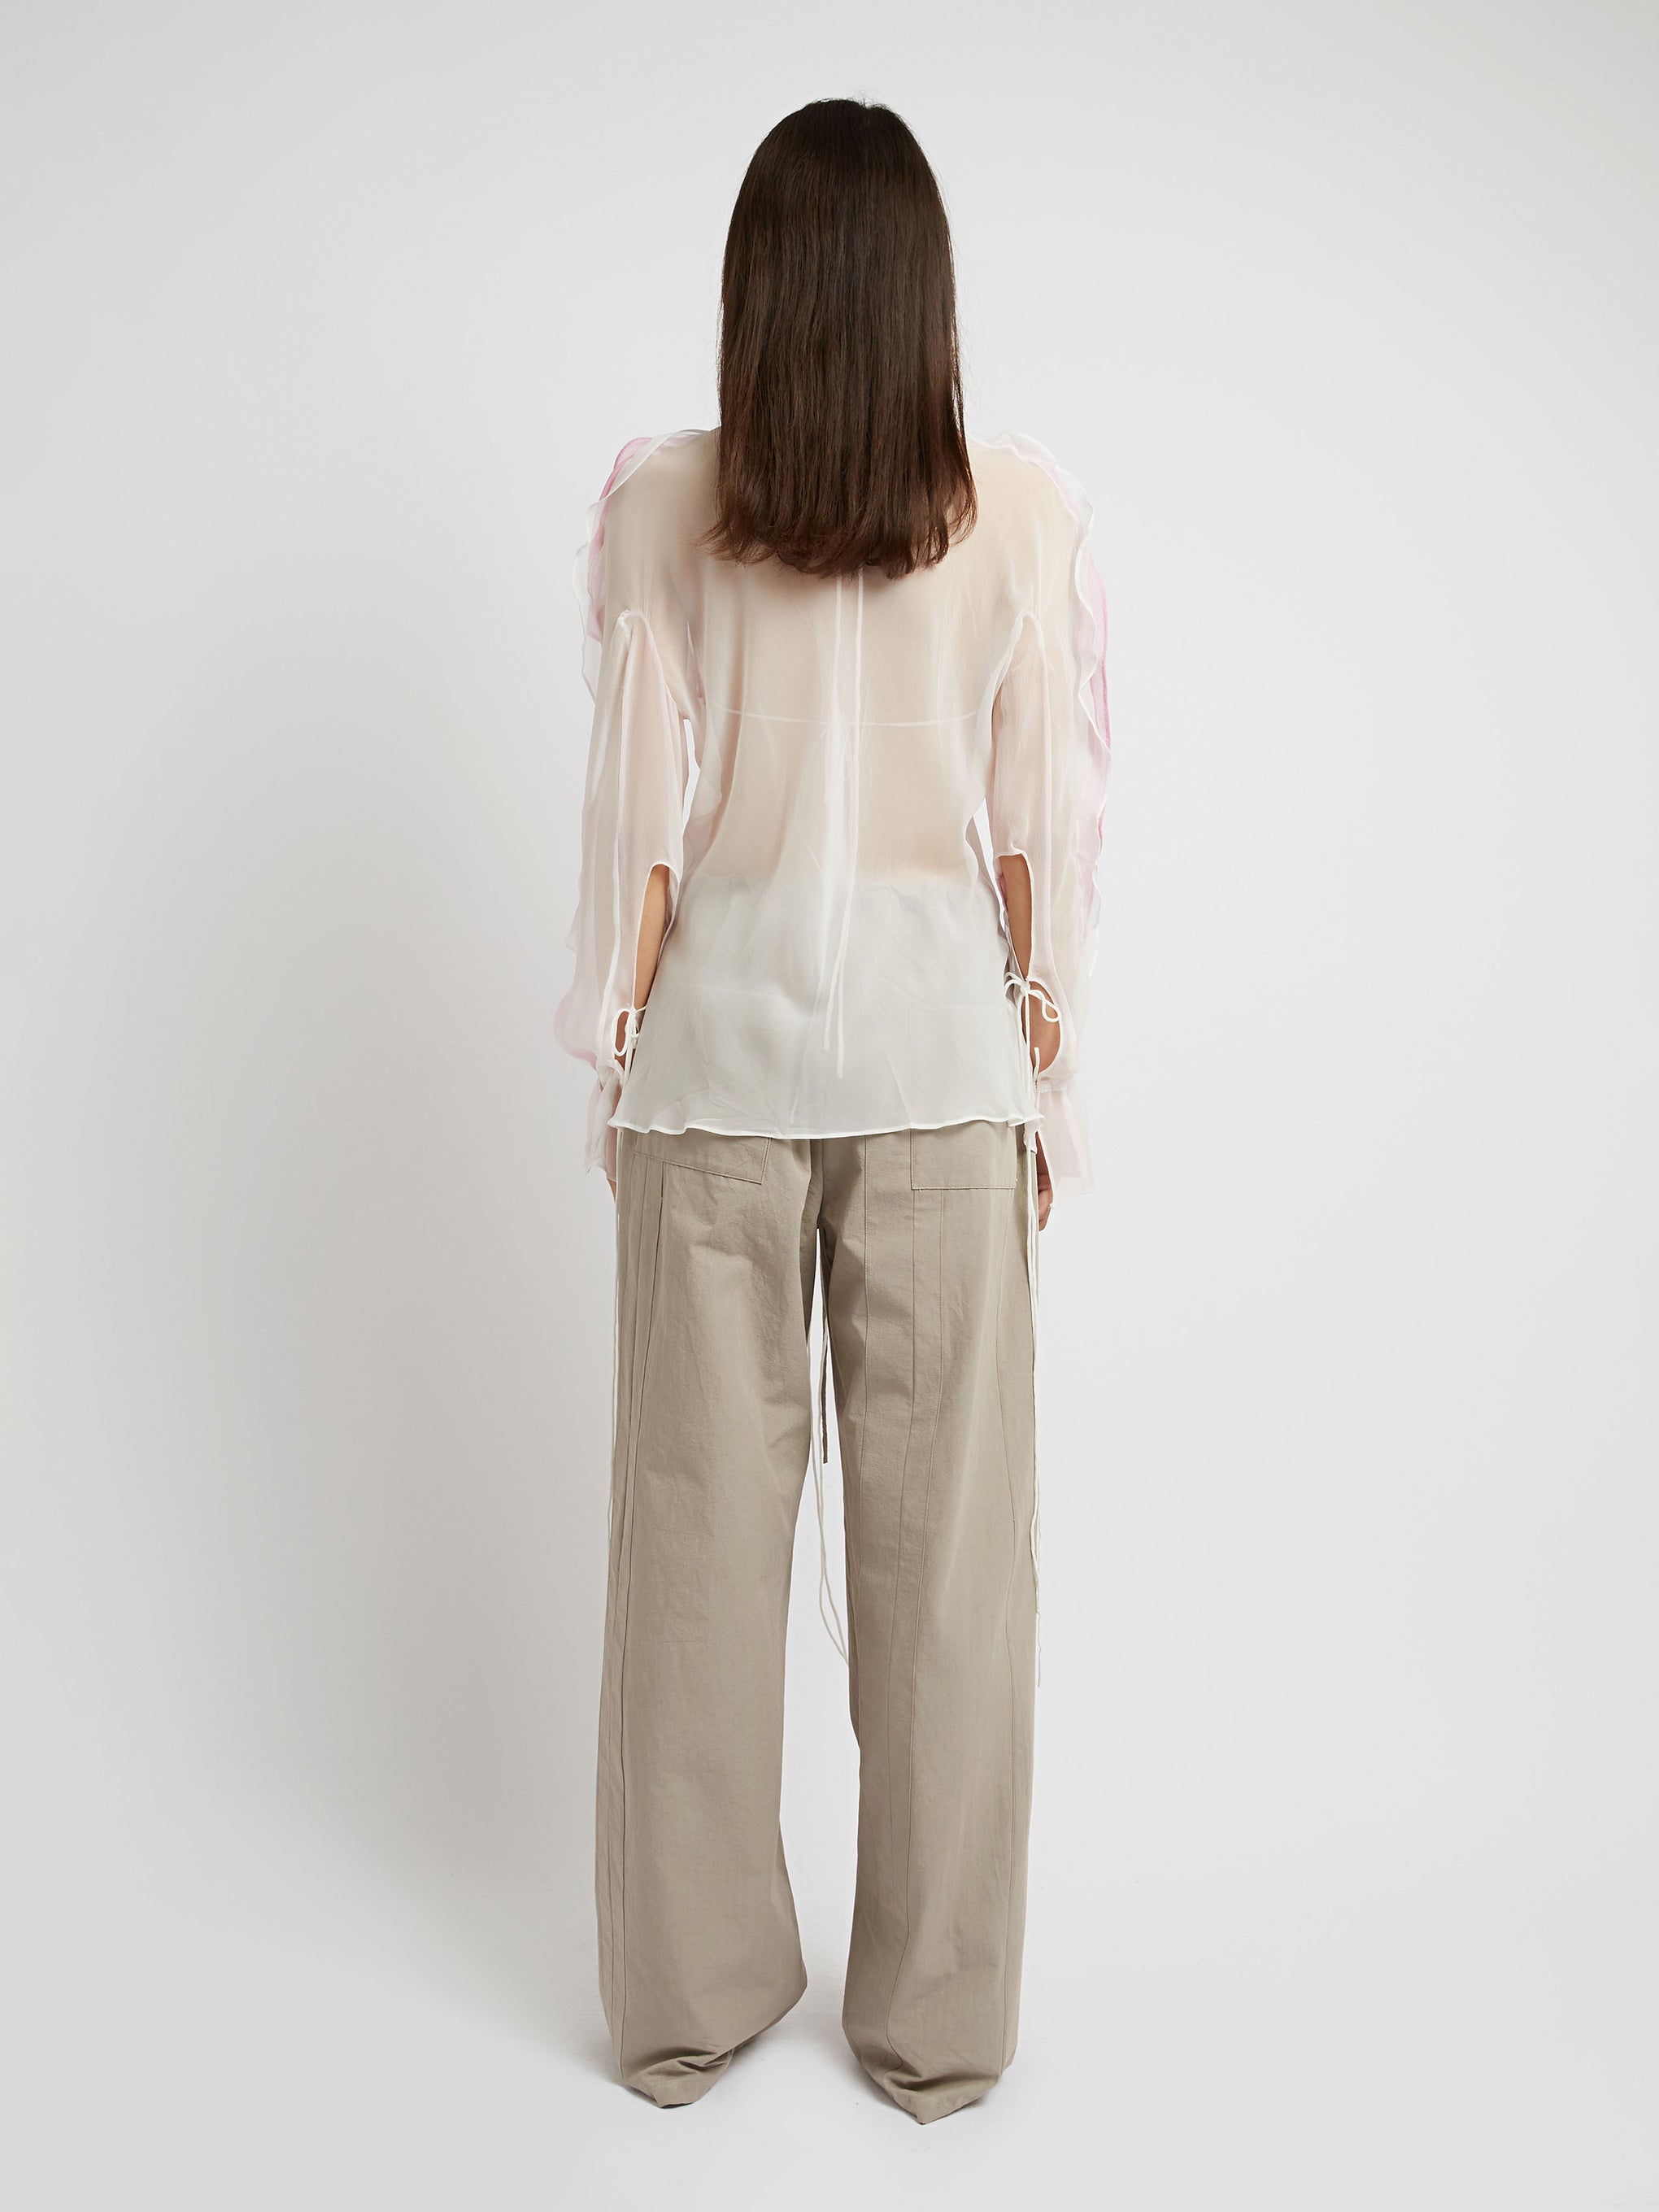 Christopher Esber | Multi Panelled Cotton Pant in Stone | The New Trend